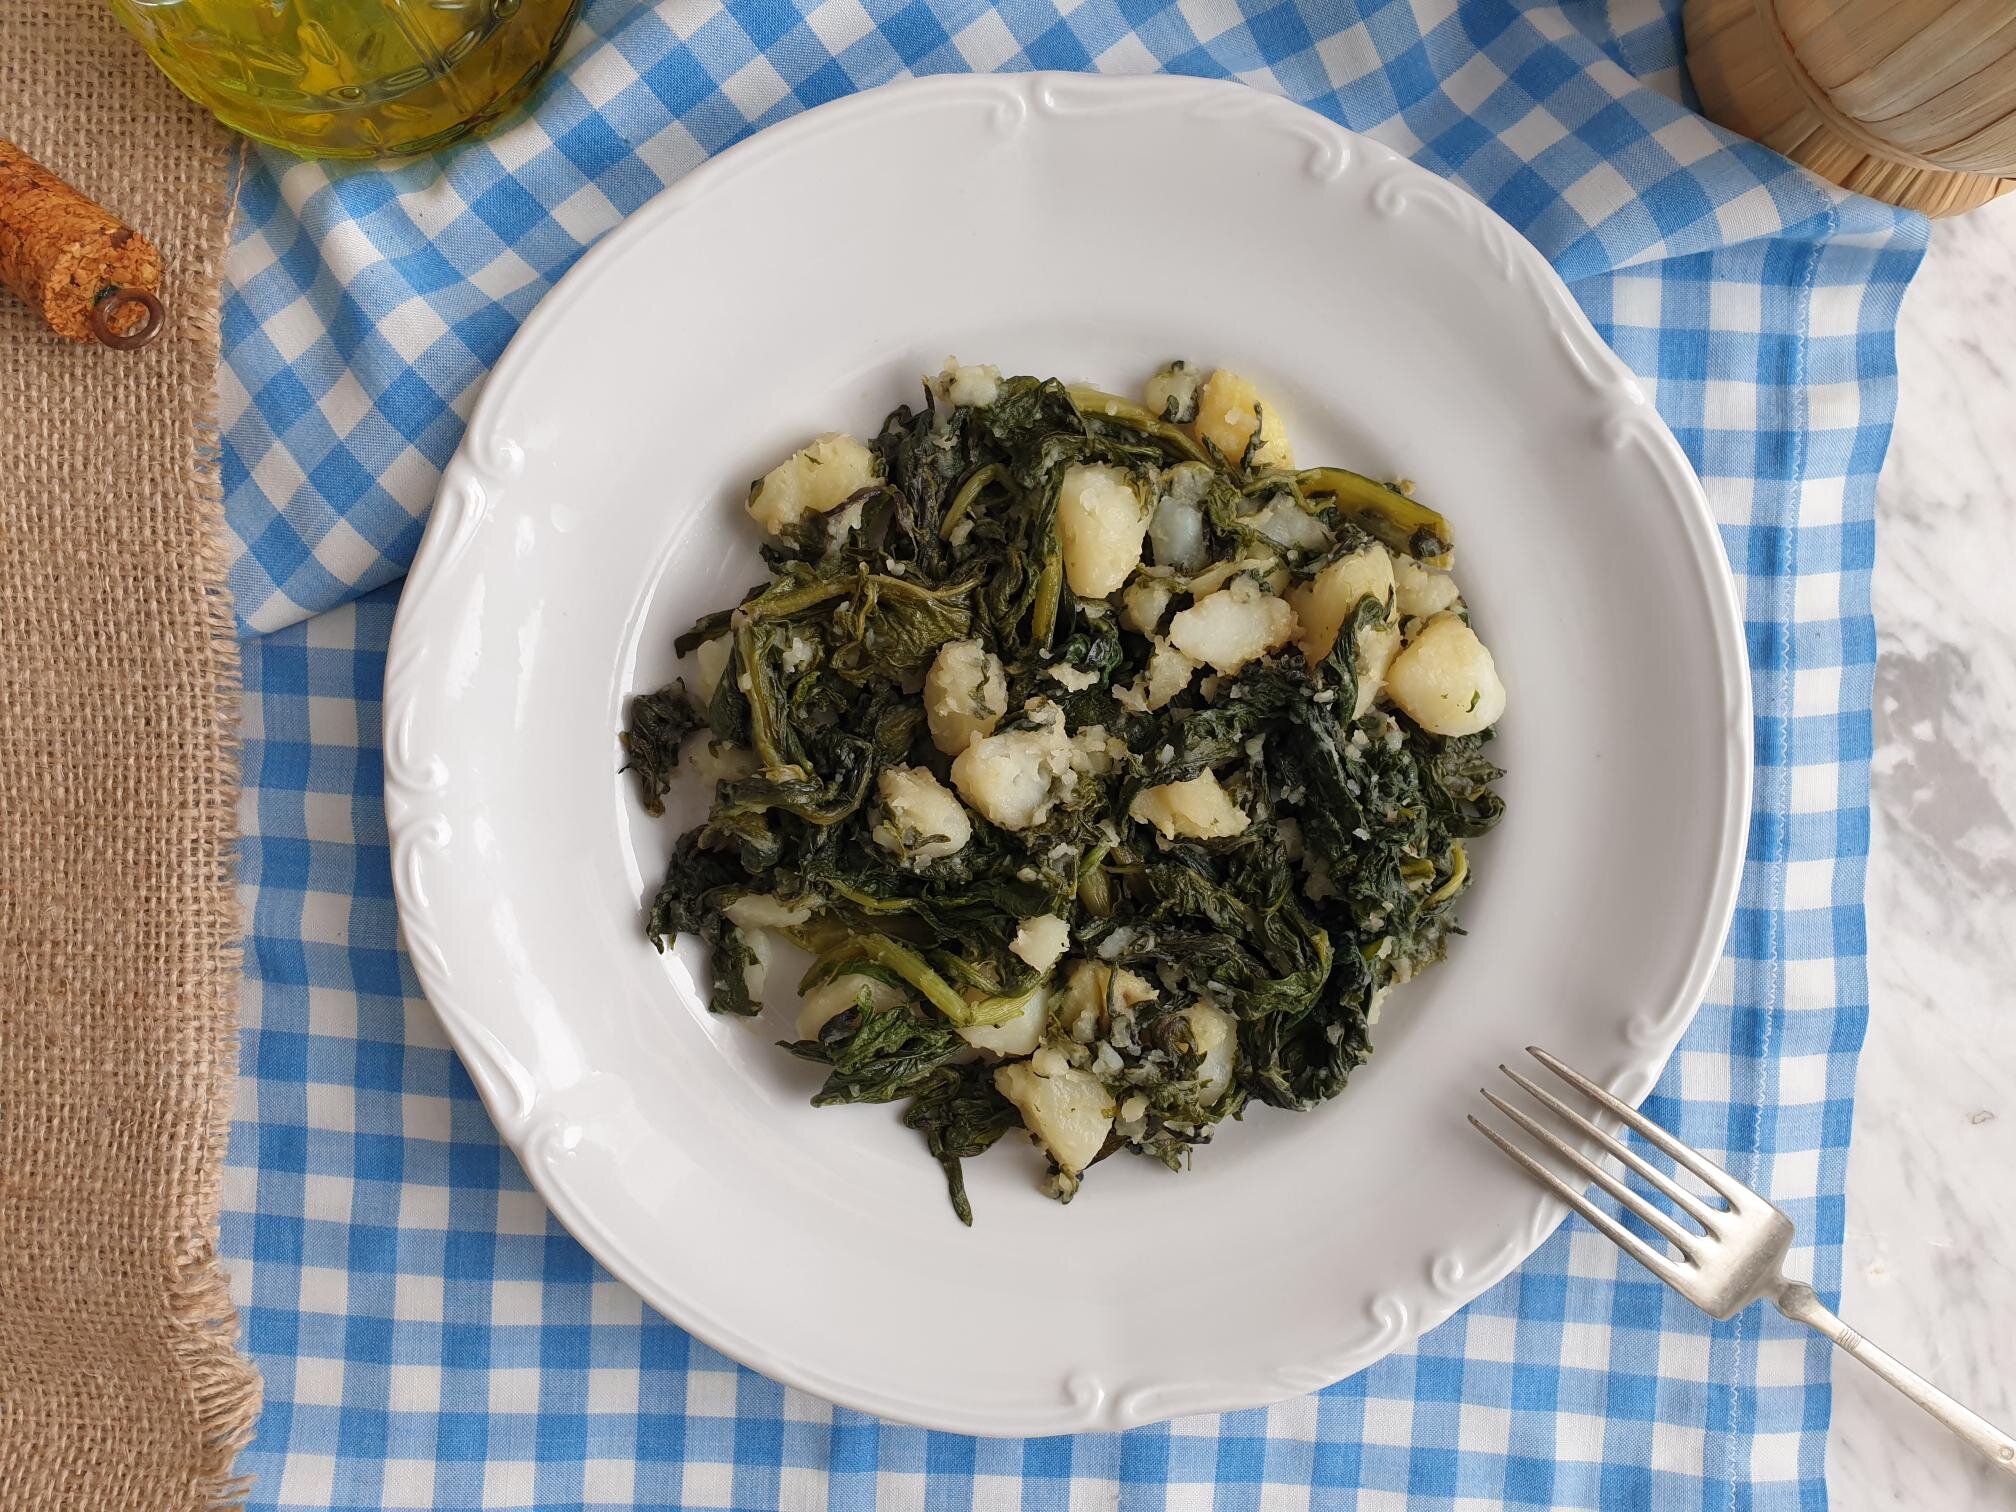 Spinach or chard with potatoes garlic and olive oil Istrian way